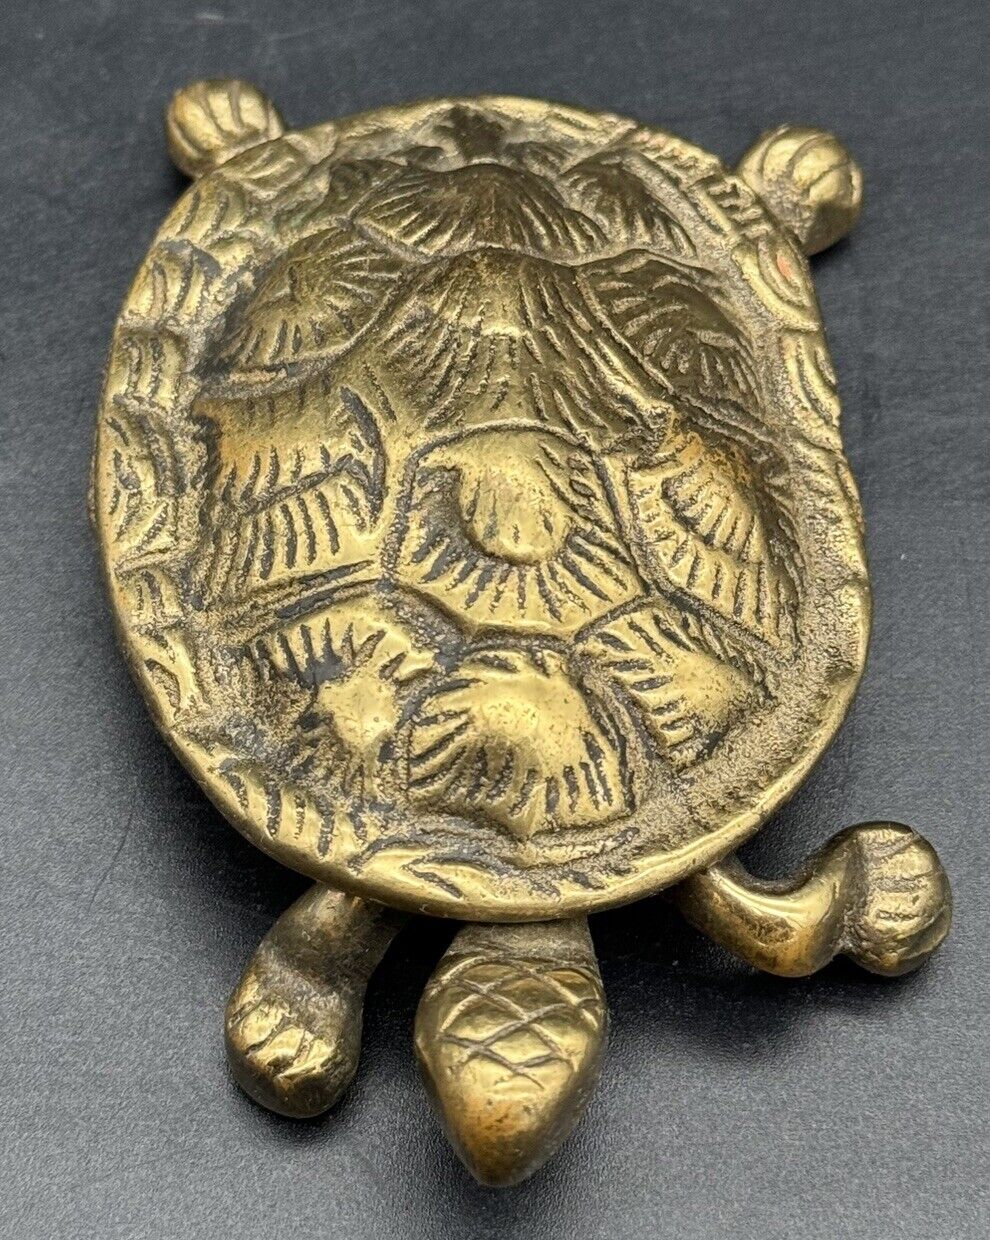 ANTIQUE VINTAGE BRASS TURTLE HINGED TRINKET BOX MADE IN ENGLAND 